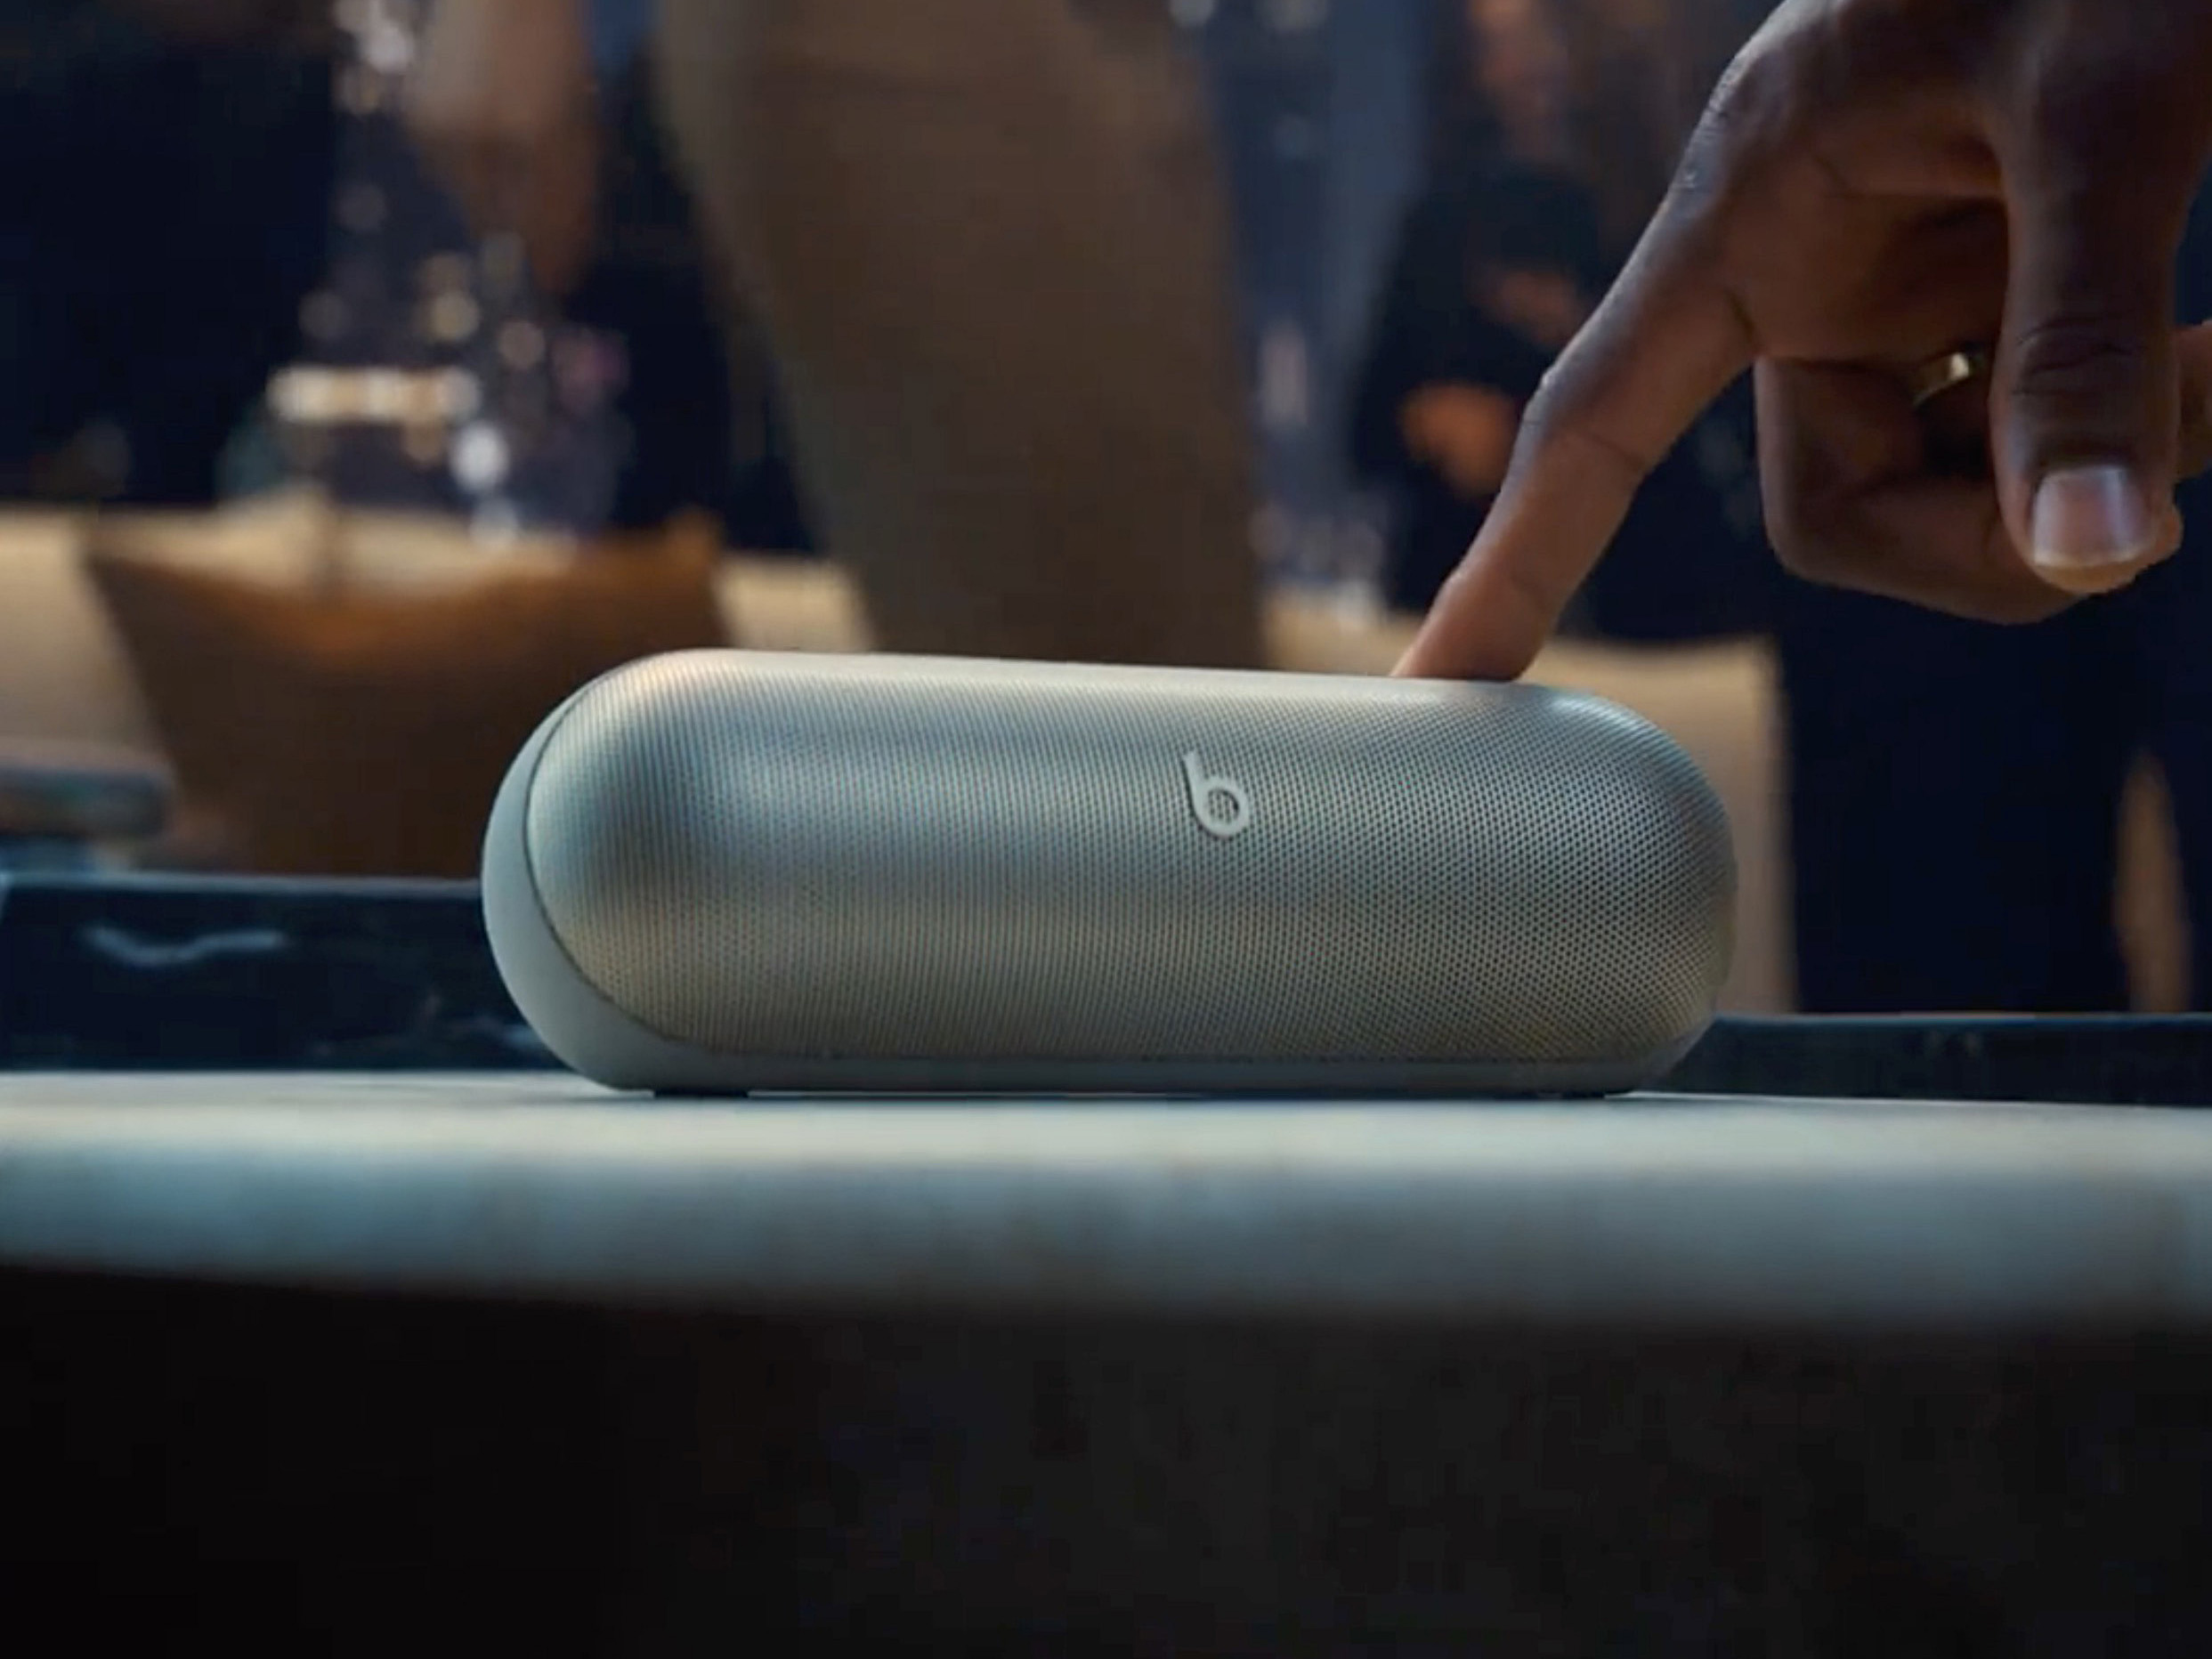 The new Beats Pill. Probably.